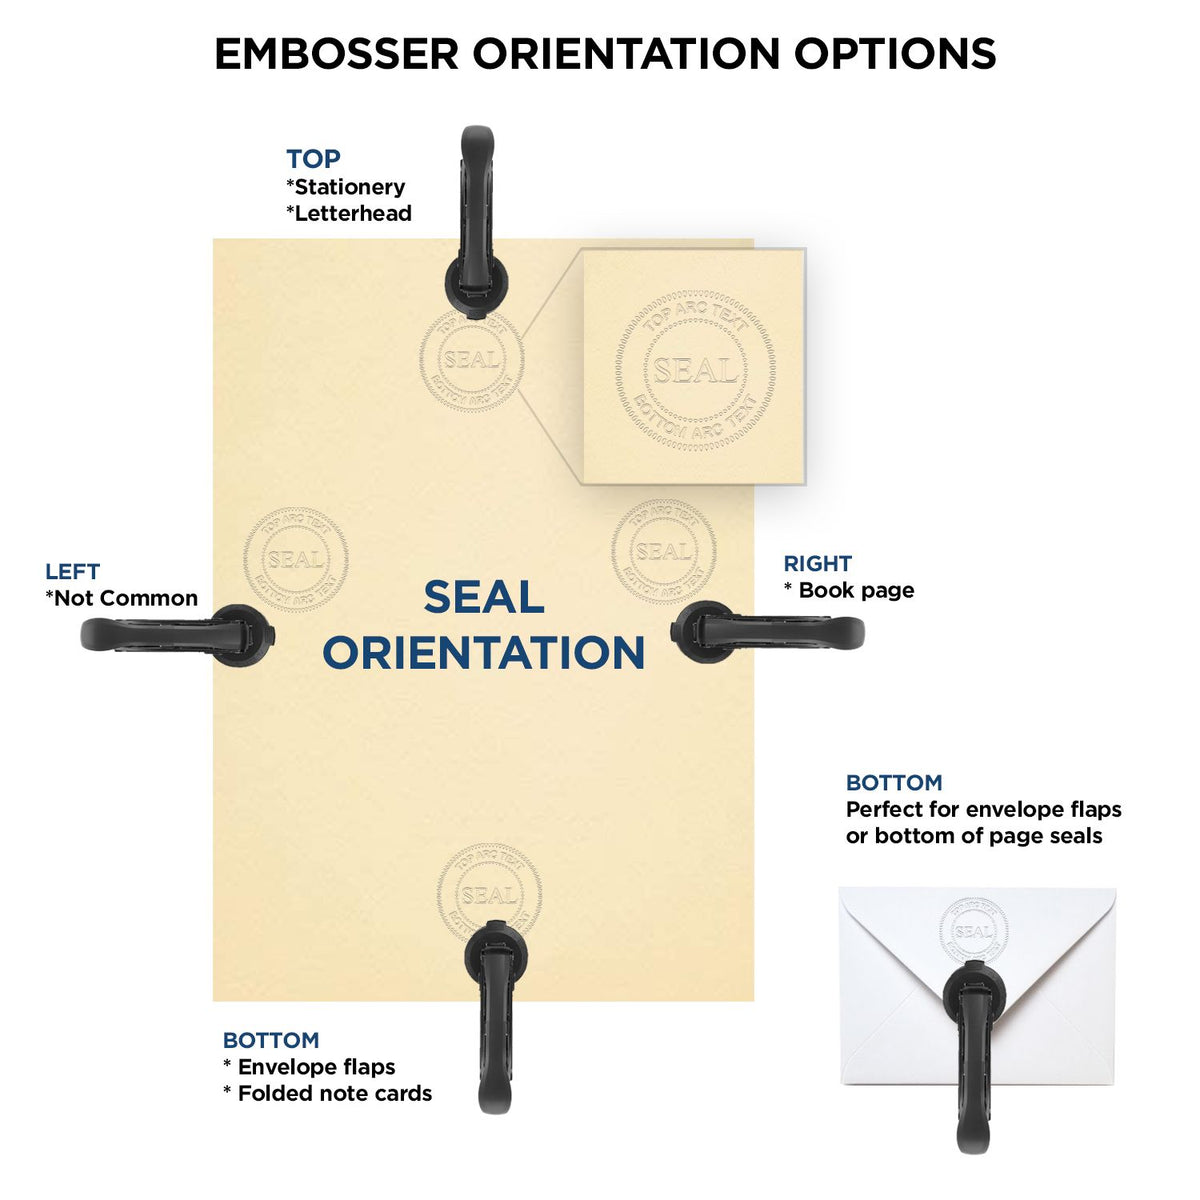 An infographic for the Heavy Duty Cast Iron Maryland Geologist Seal Embosser showing embosser orientation, this is showing examples of a top, bottom, right and left insert.